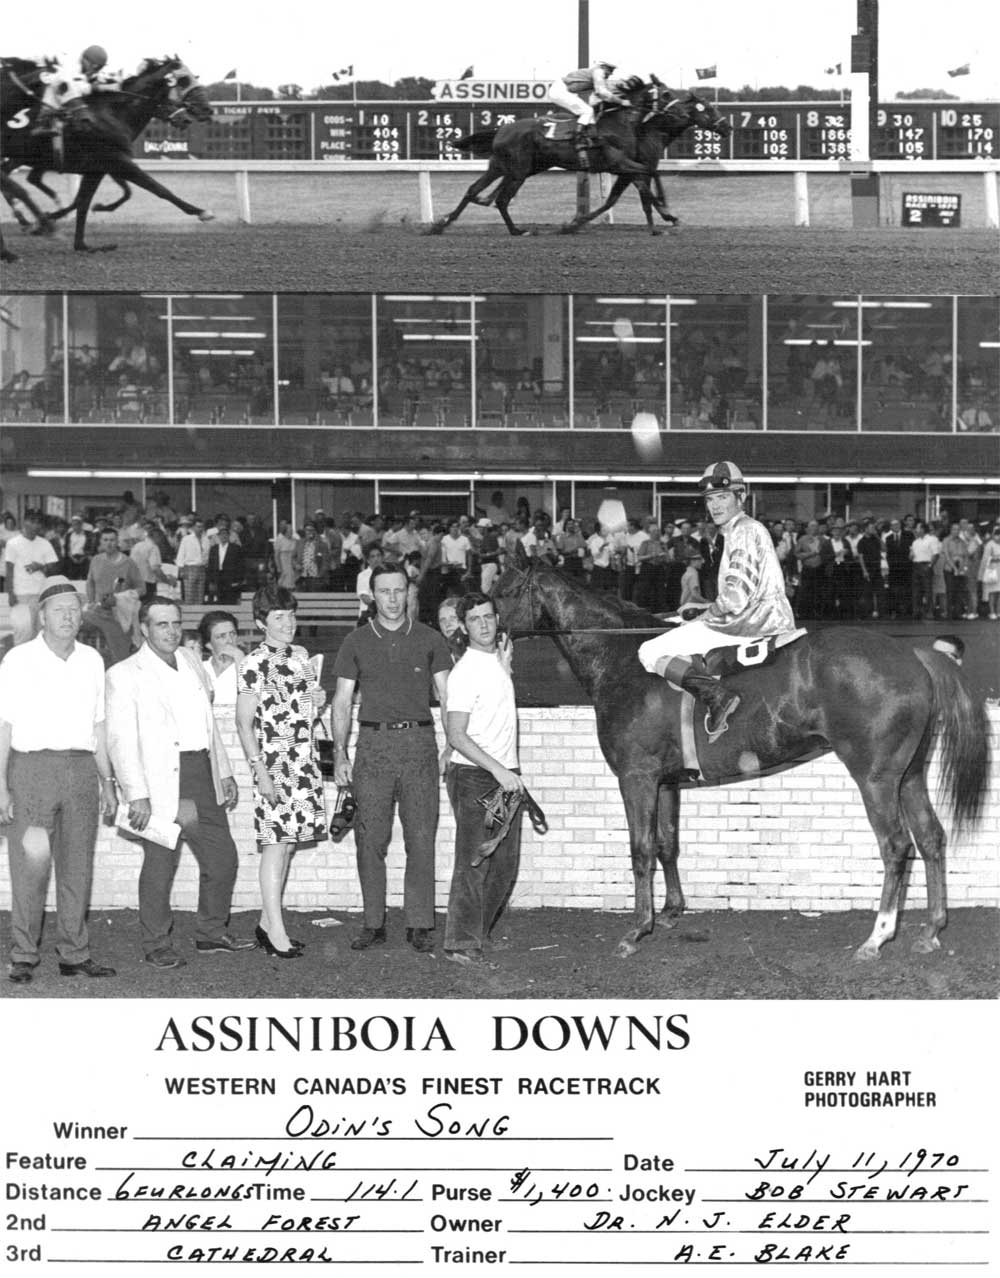 Odin's Song wins at Assiniboia Downs. July 11, 1970. Norm Elder second from left of horse. Trainer Bert Blake on far left.